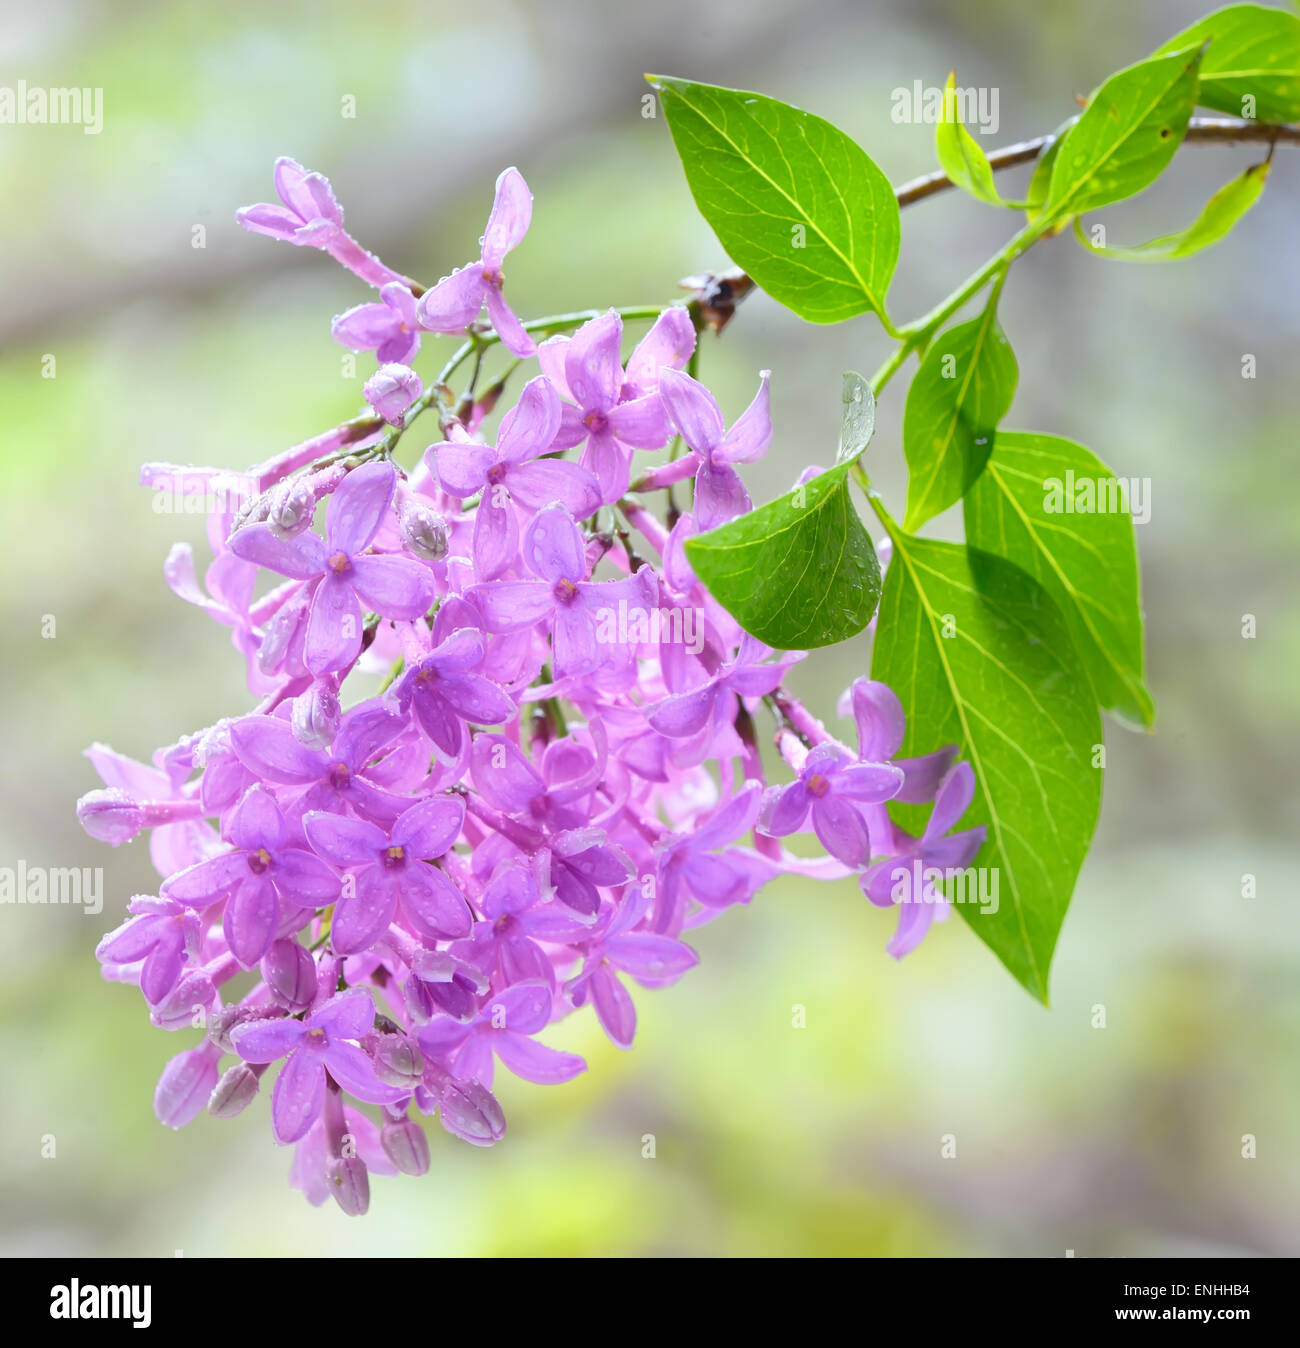 Macro image of spring lilac violet flowers Stock Photo